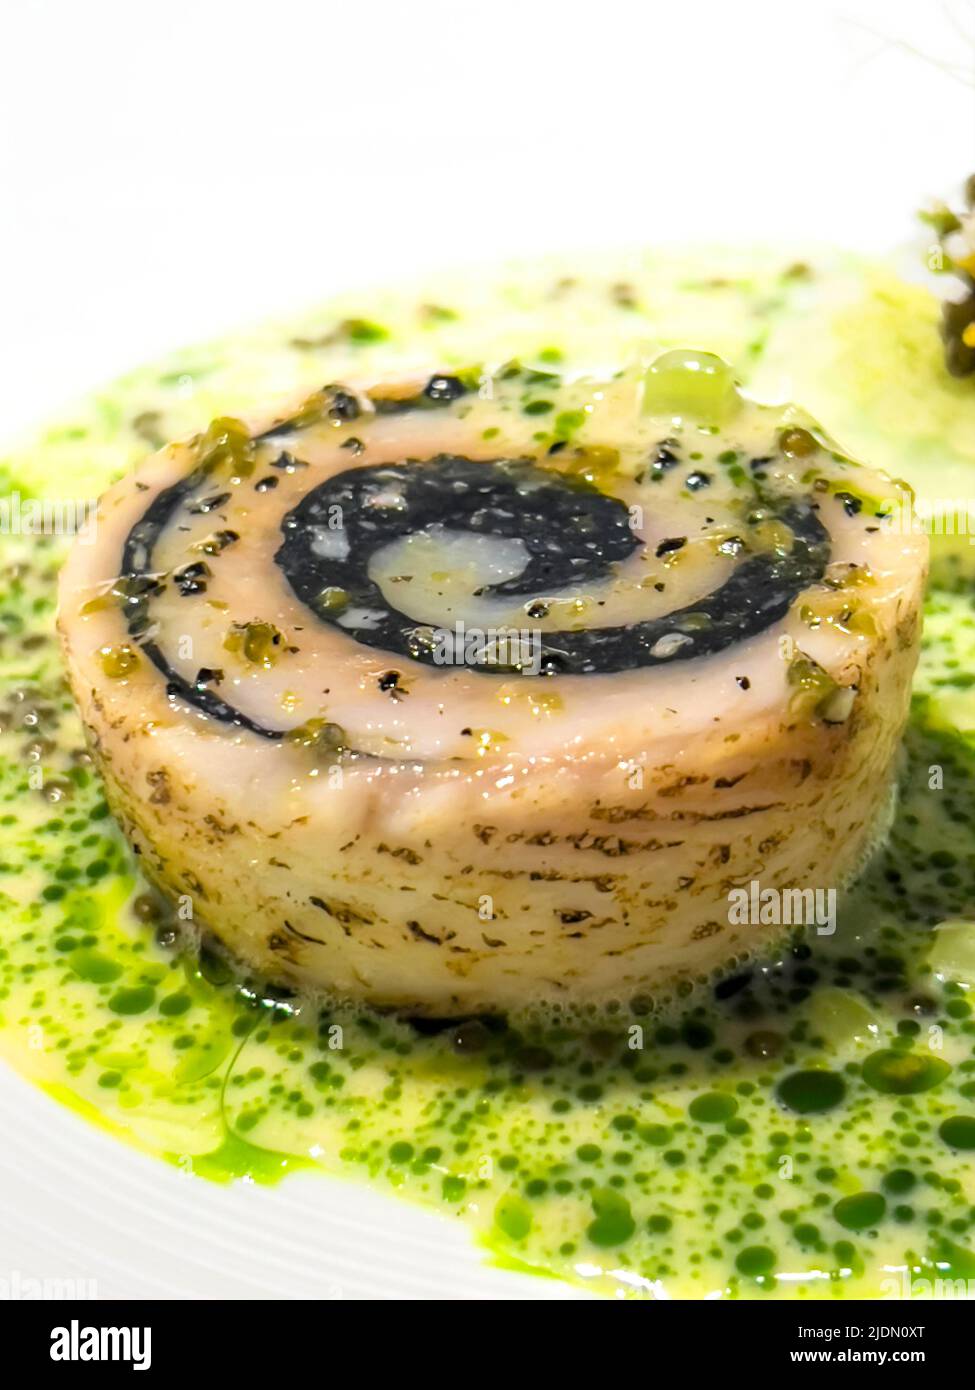 Michelin star restaurant fish course from the taster menu Stock Photo